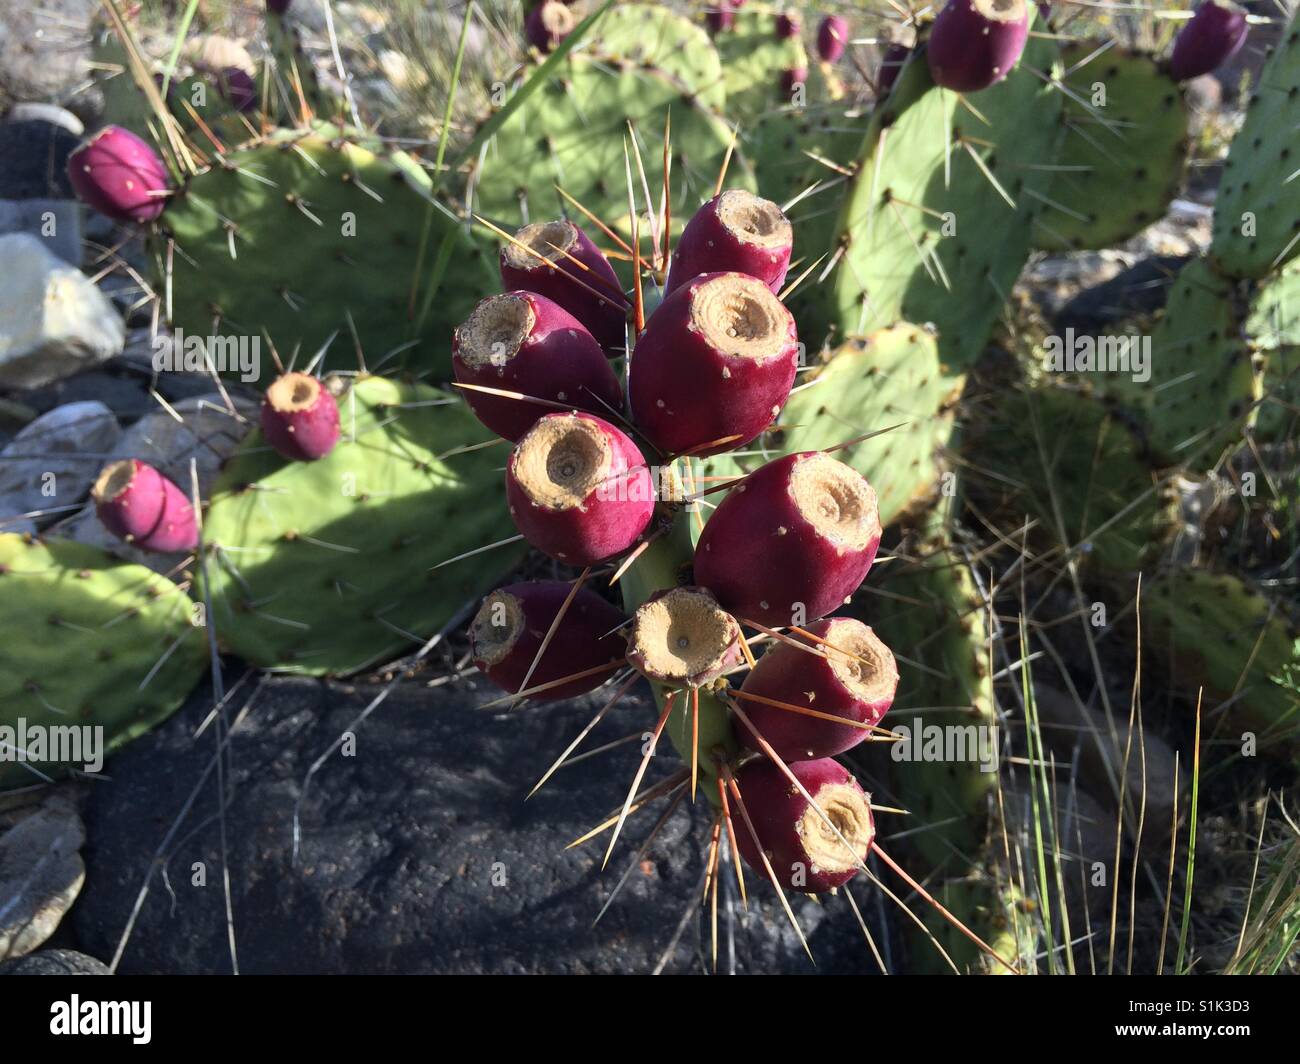 Prickly Pear cactus fruit, New Mexico, US Stock Photo